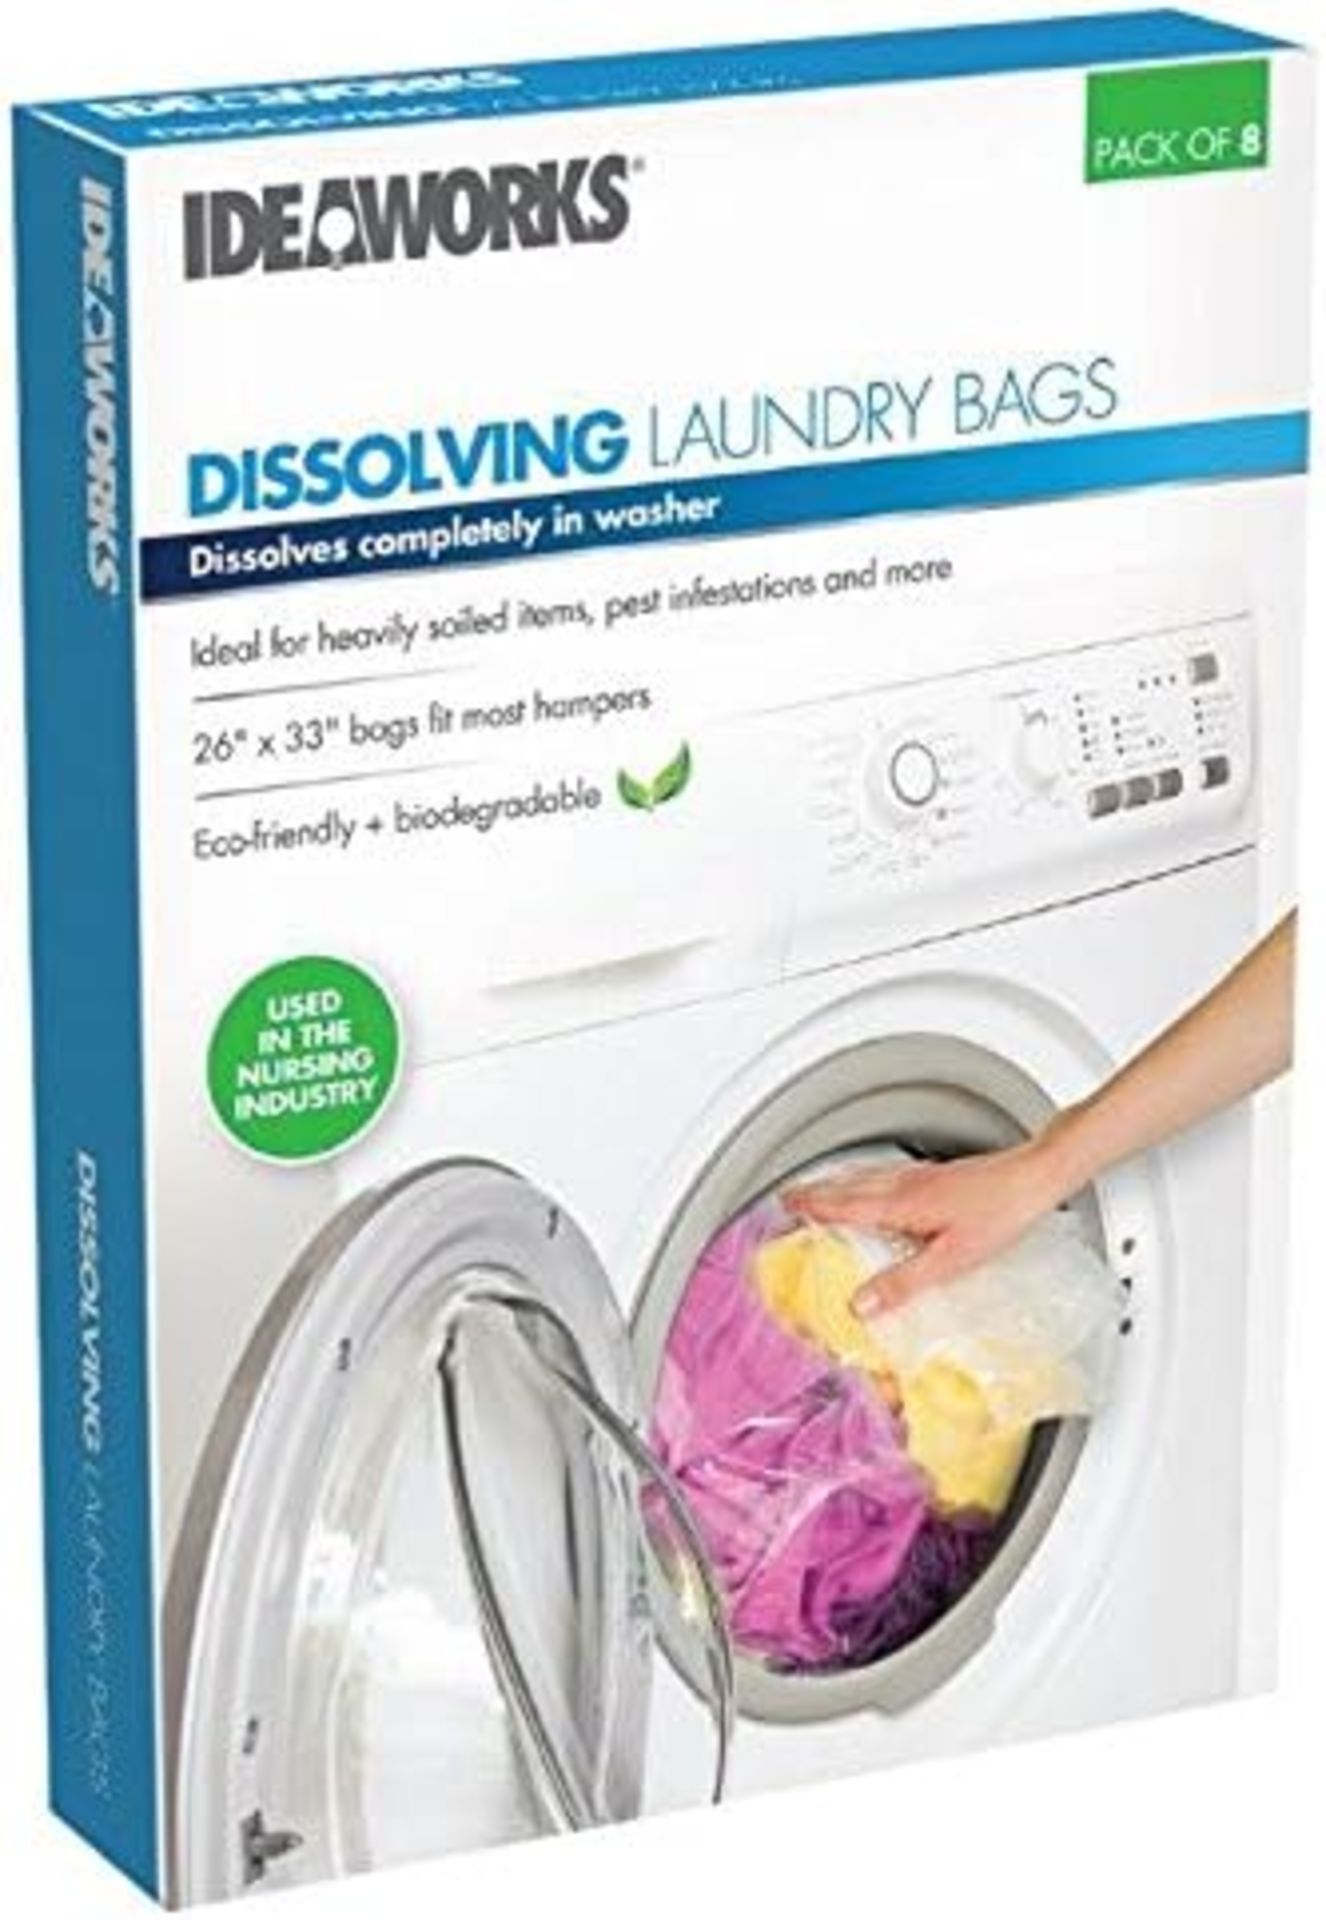 30x BRAND NEW IDEAWORKS Dissolving Laundry Bags 8 Pack. RRP £7.50 EACH. Pack of 8. Put in the